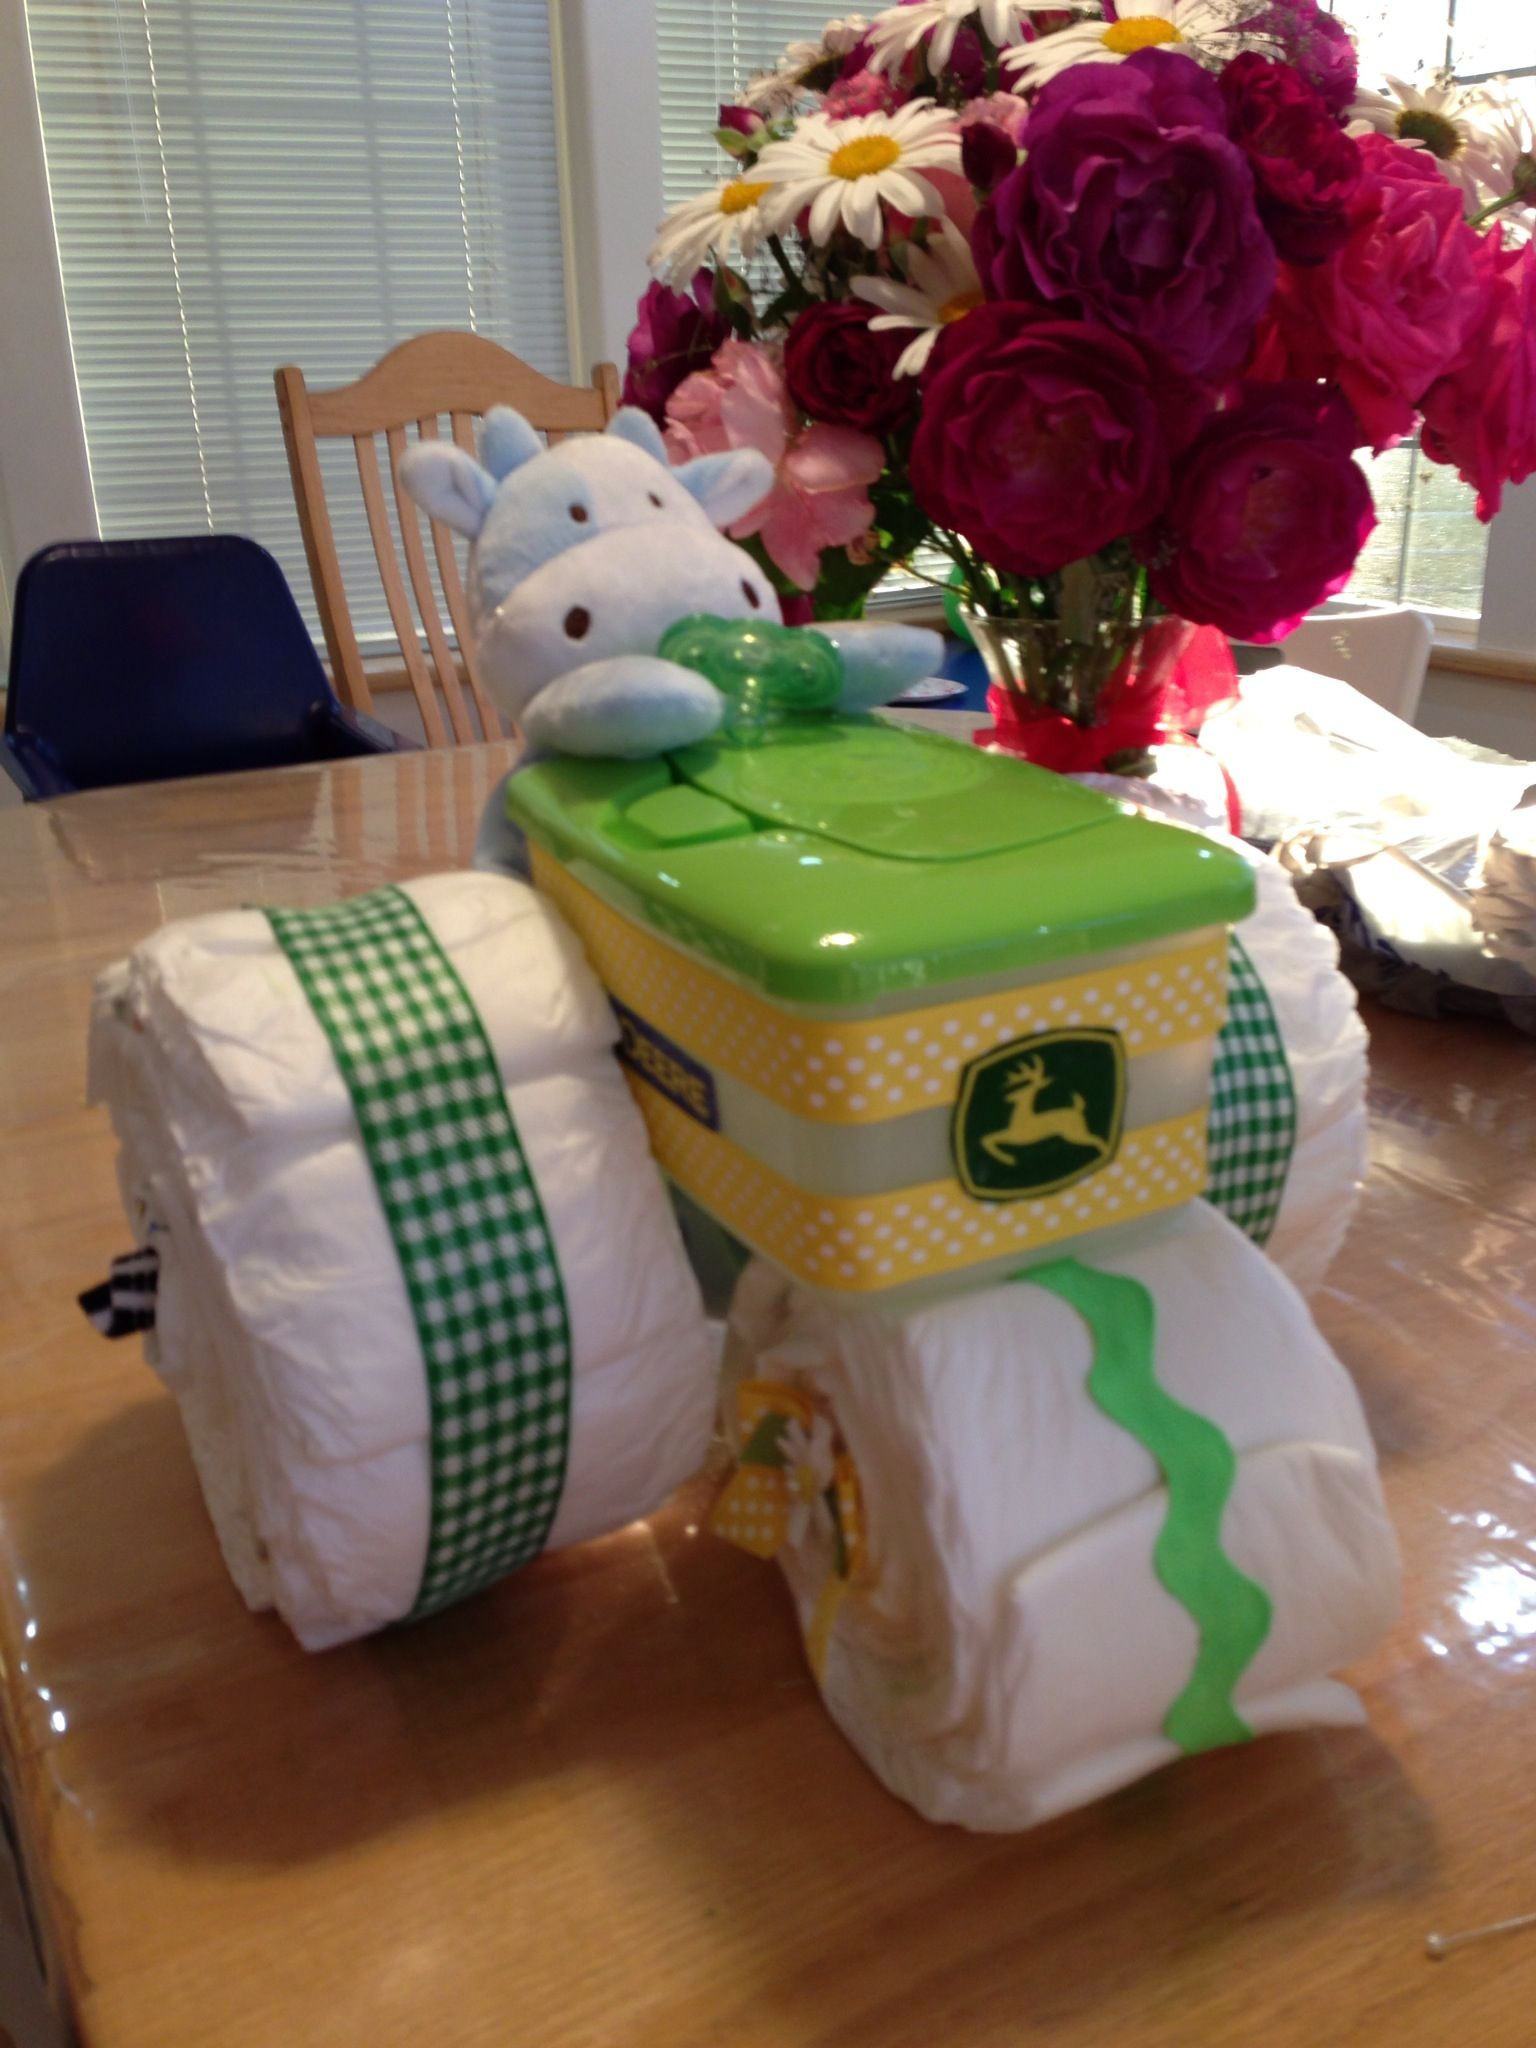 Baby Shower Craft Gift Ideas
 Diaper tractor for my daughter s new baby